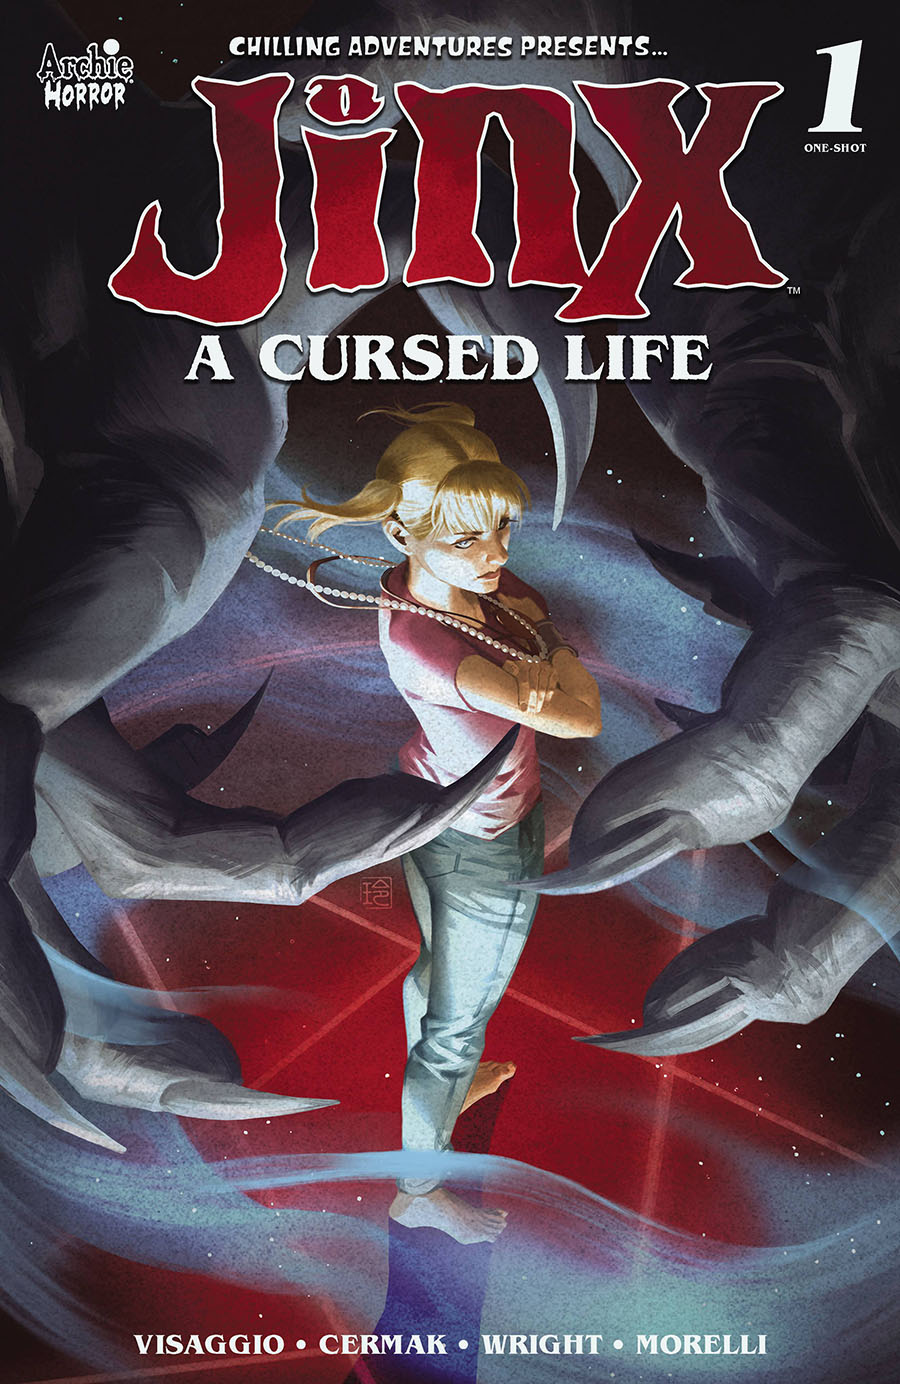 Chilling Adventures Presents Jinx A Cursed Life #1 (One Shot) Cover B Variant Reiko Murakami Cover